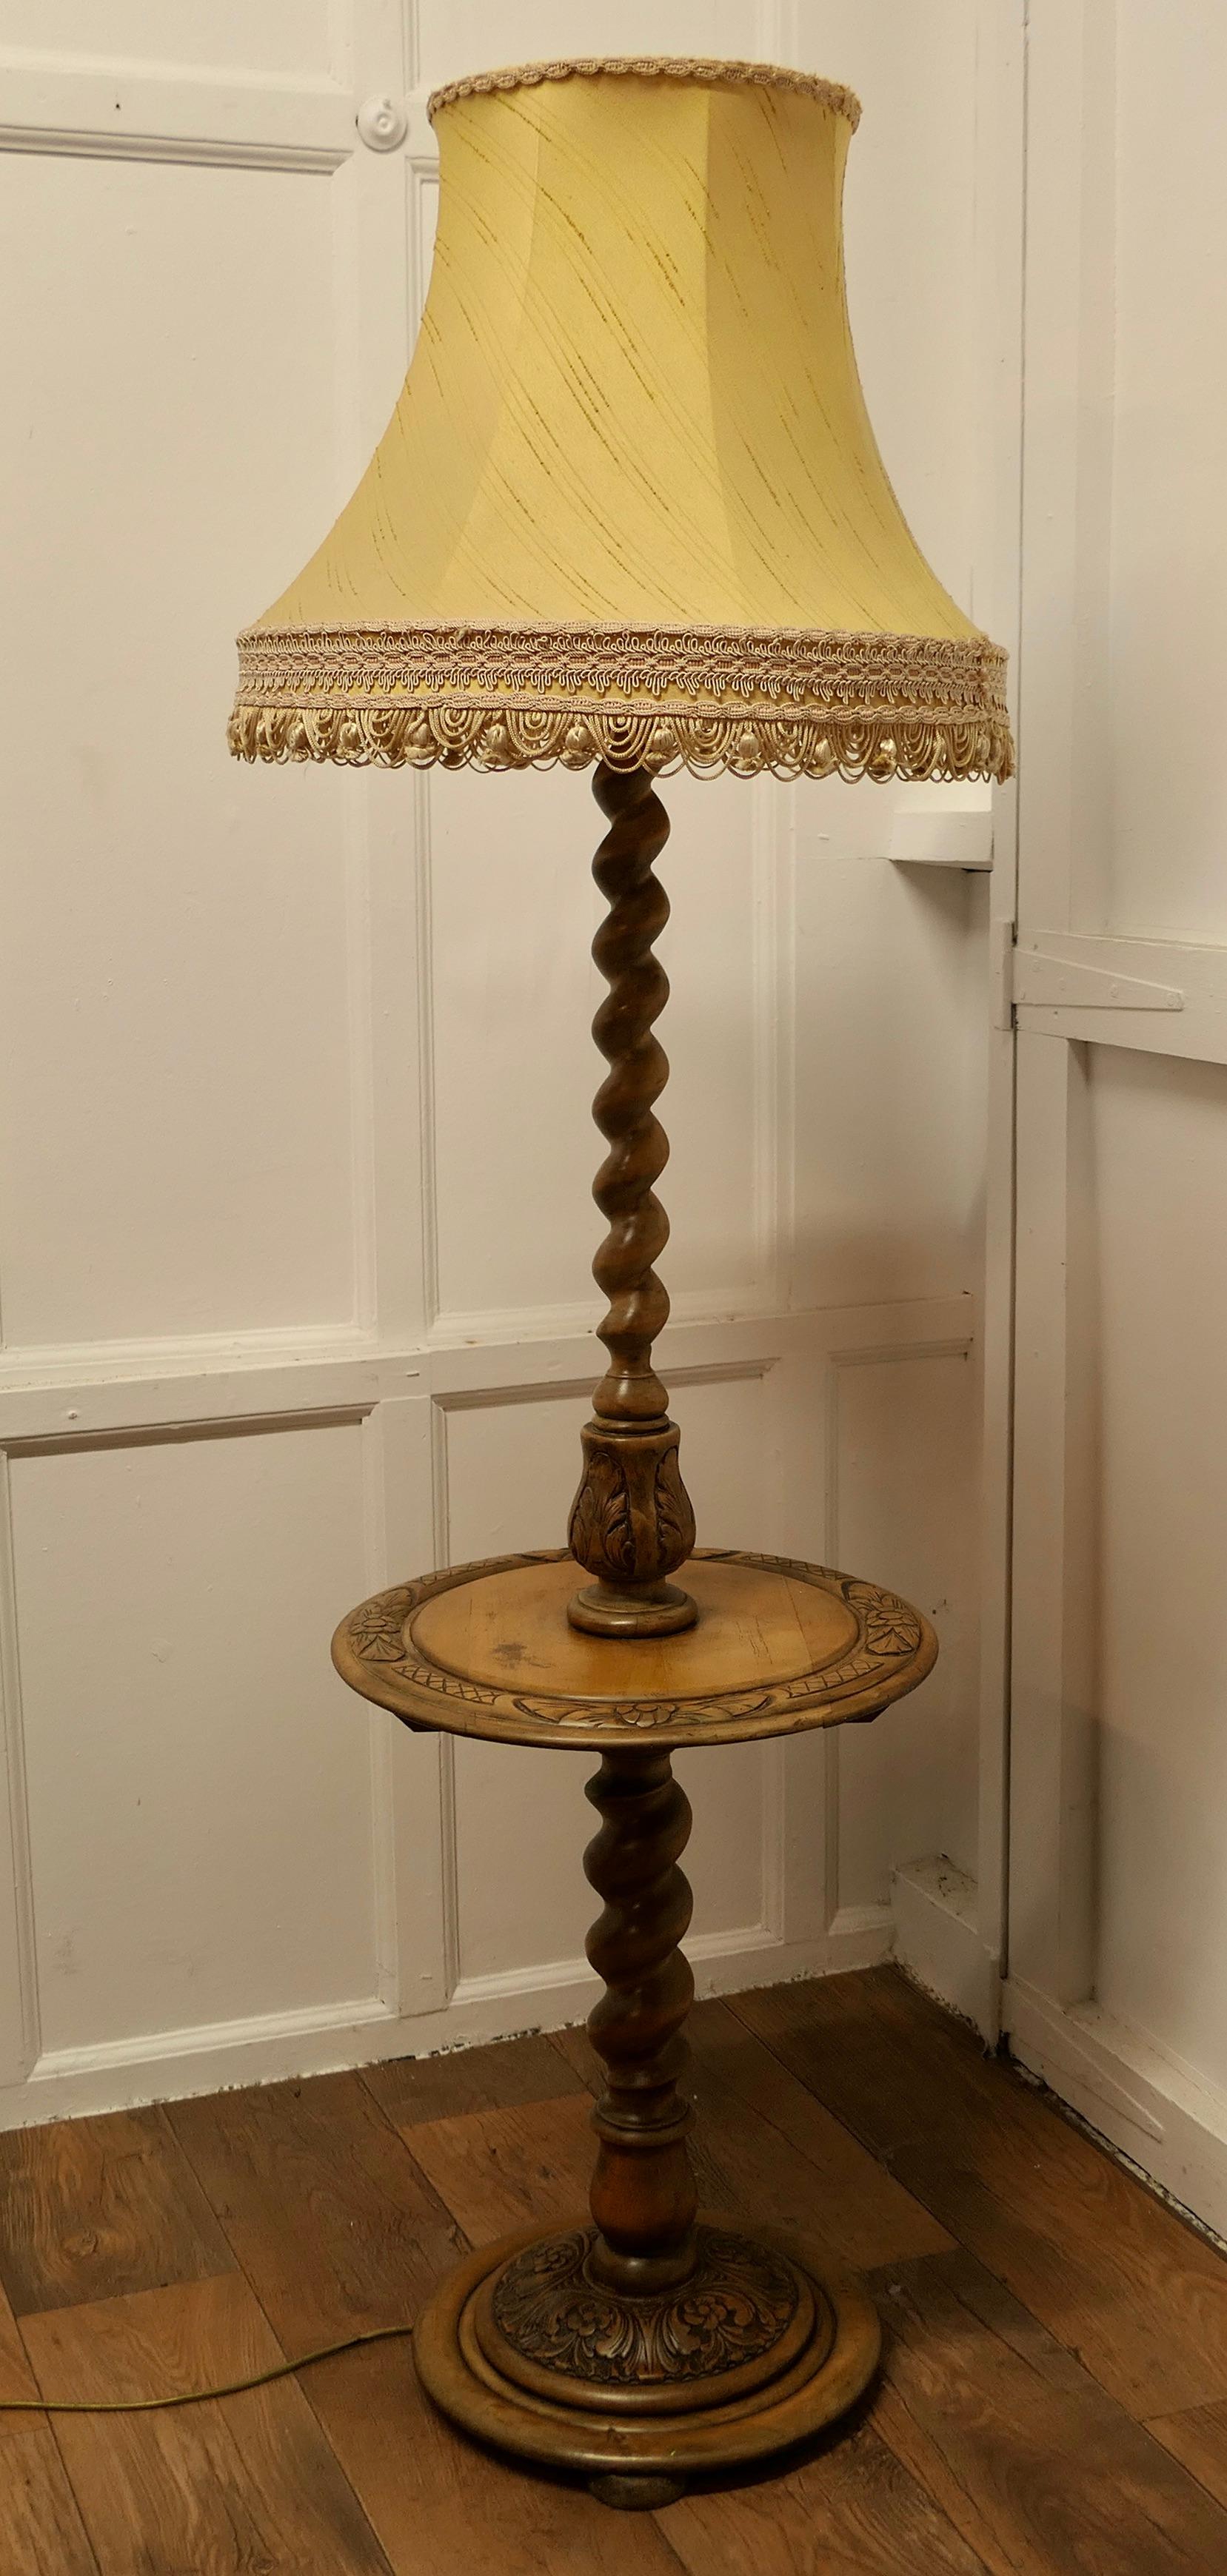 Gothic Style Barley Twist Floor Lamp Table

This is an unusual Piece, the base of the lamp is in the form of a small carved wine table and the lamp rises from the centre 
The wooden column of the lamp has delightful chunky barley twist turning
The